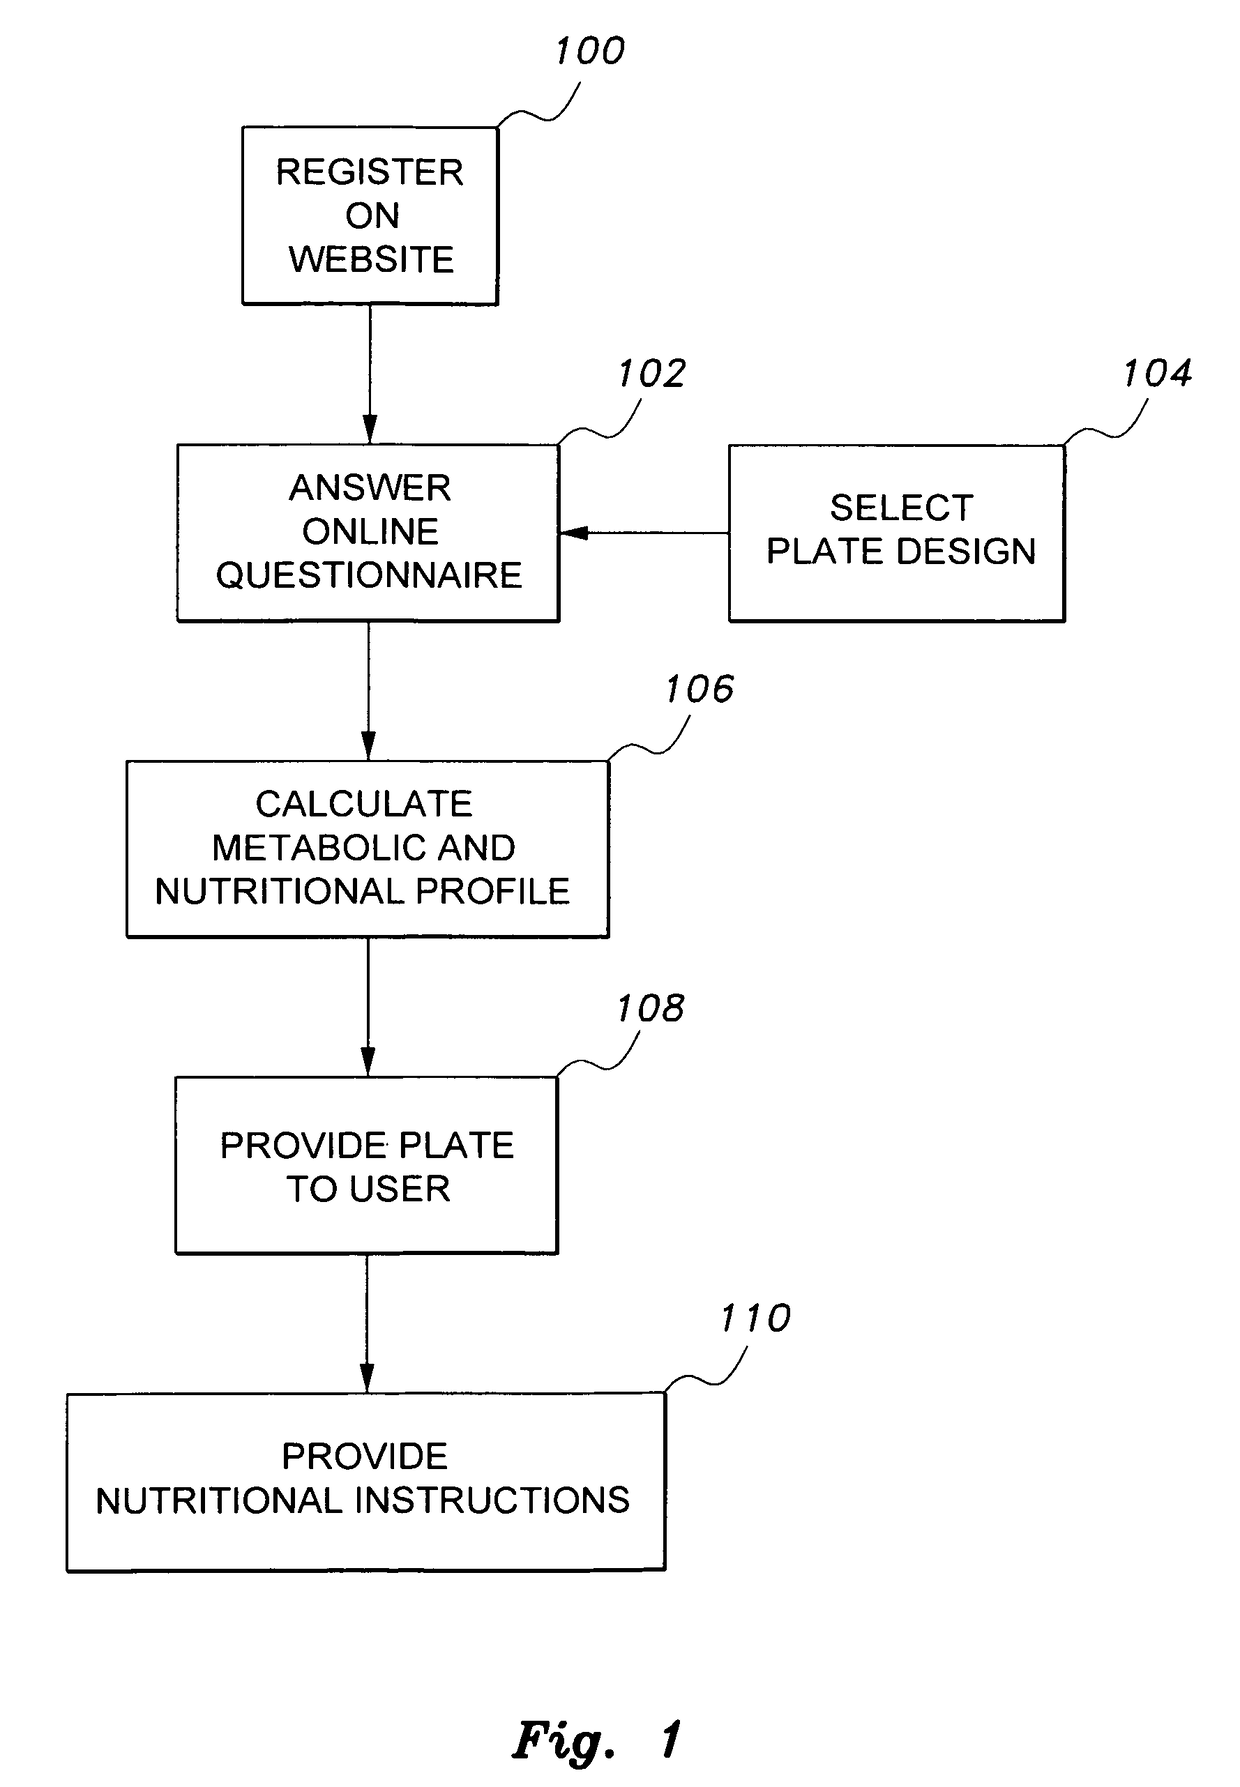 Method for customizing a nutrition plate